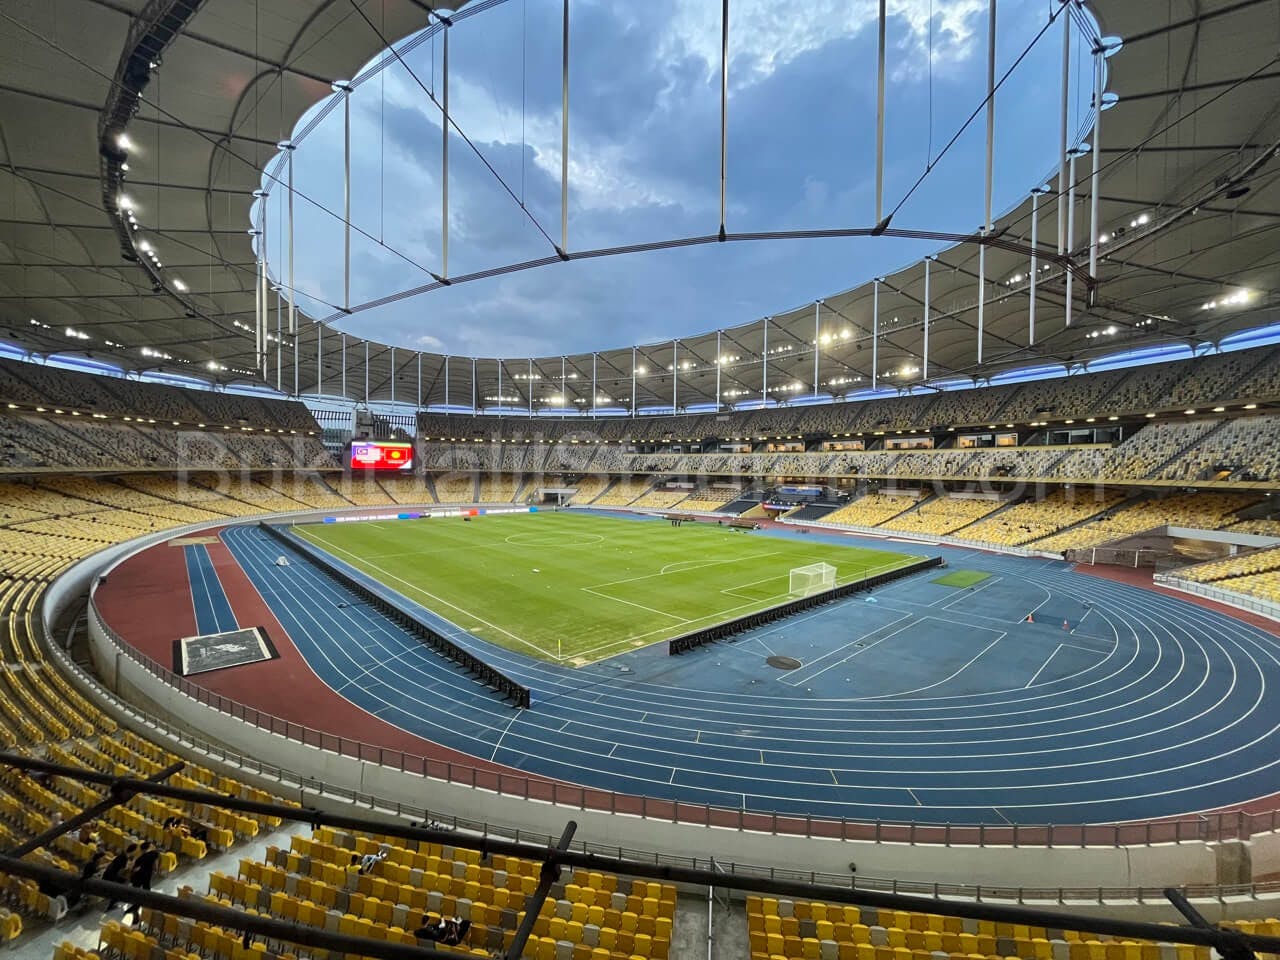 0.5x View of Bukit Jalil field from section 207 of Stadium Bukit Jalil.